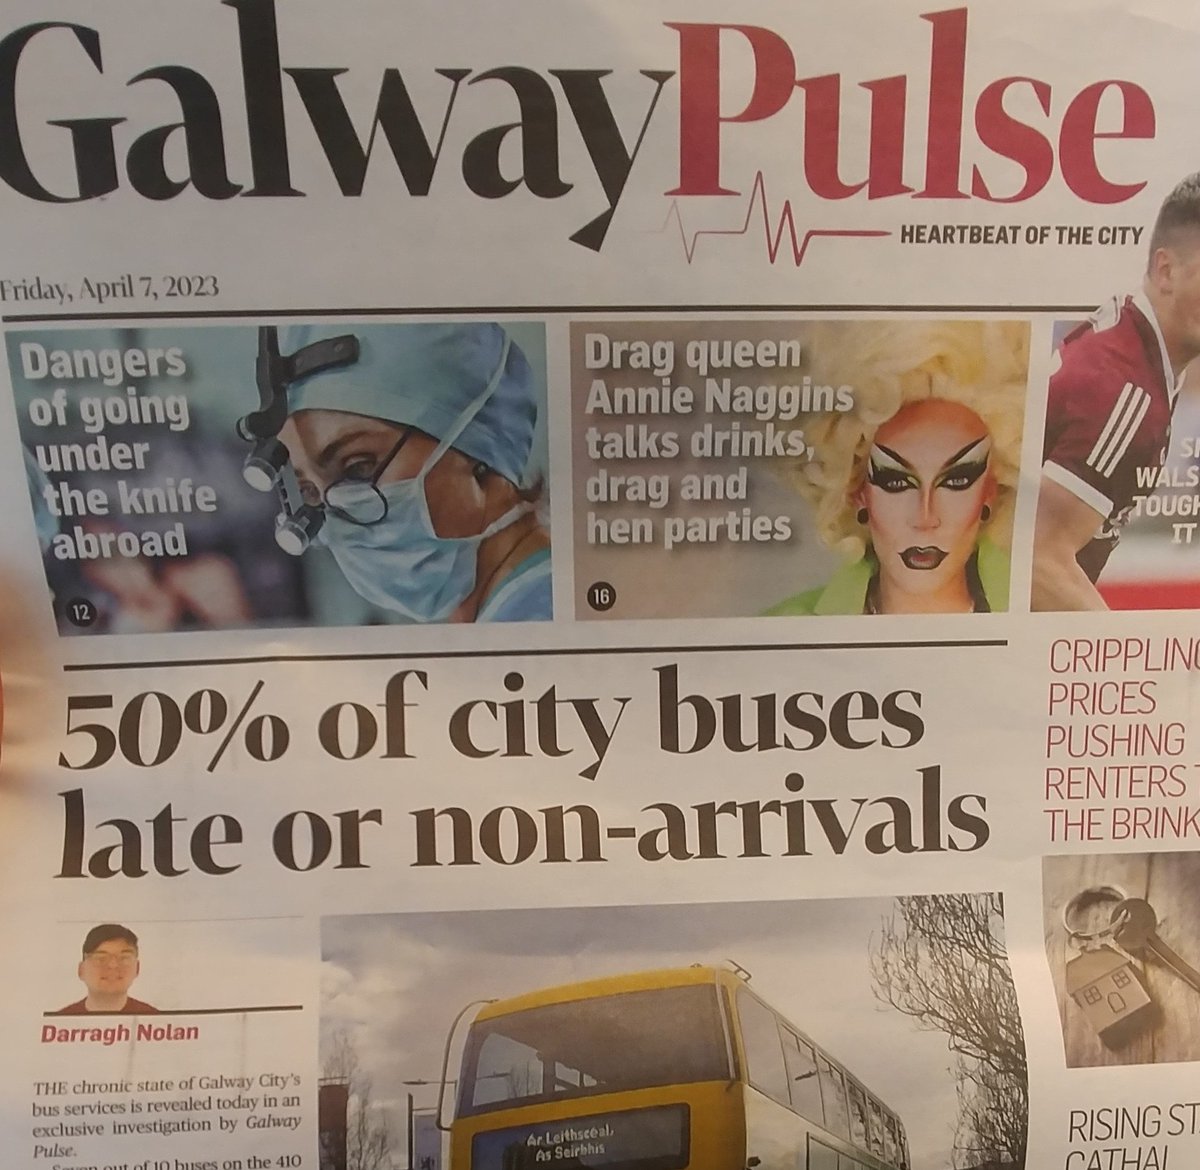 Though not a surprise to regular bus users in the city, 50% of buses arriving late or not at all is a terrible reflection of our public transport. Excellent journalism by the team @galwaypulse1. We need to demand PT that is safe, accessible, affordable, frequent & reliable.